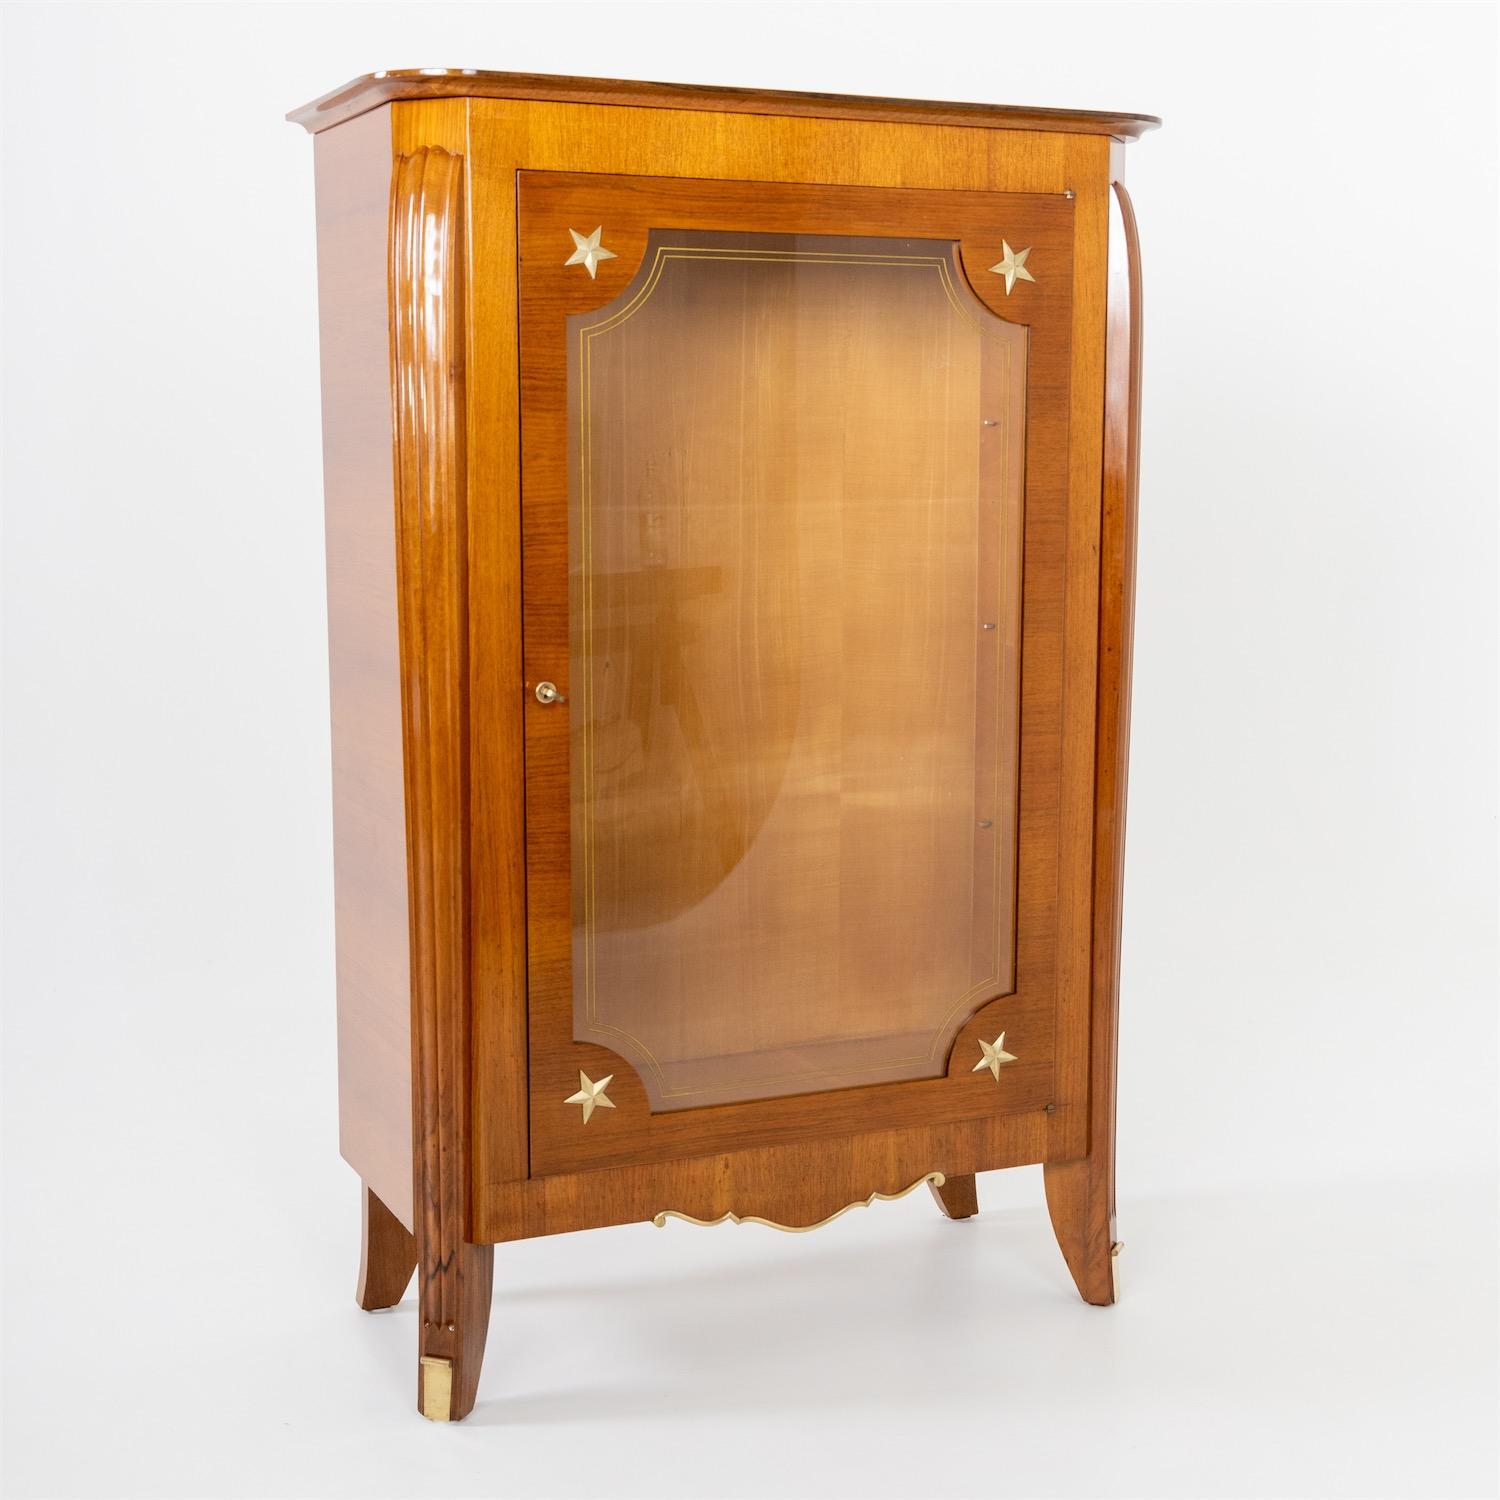 Single door glazed display case with brass star-shaped appliques and slightly trapezoidal body. The pilasters are fluted and slightly shouldered.